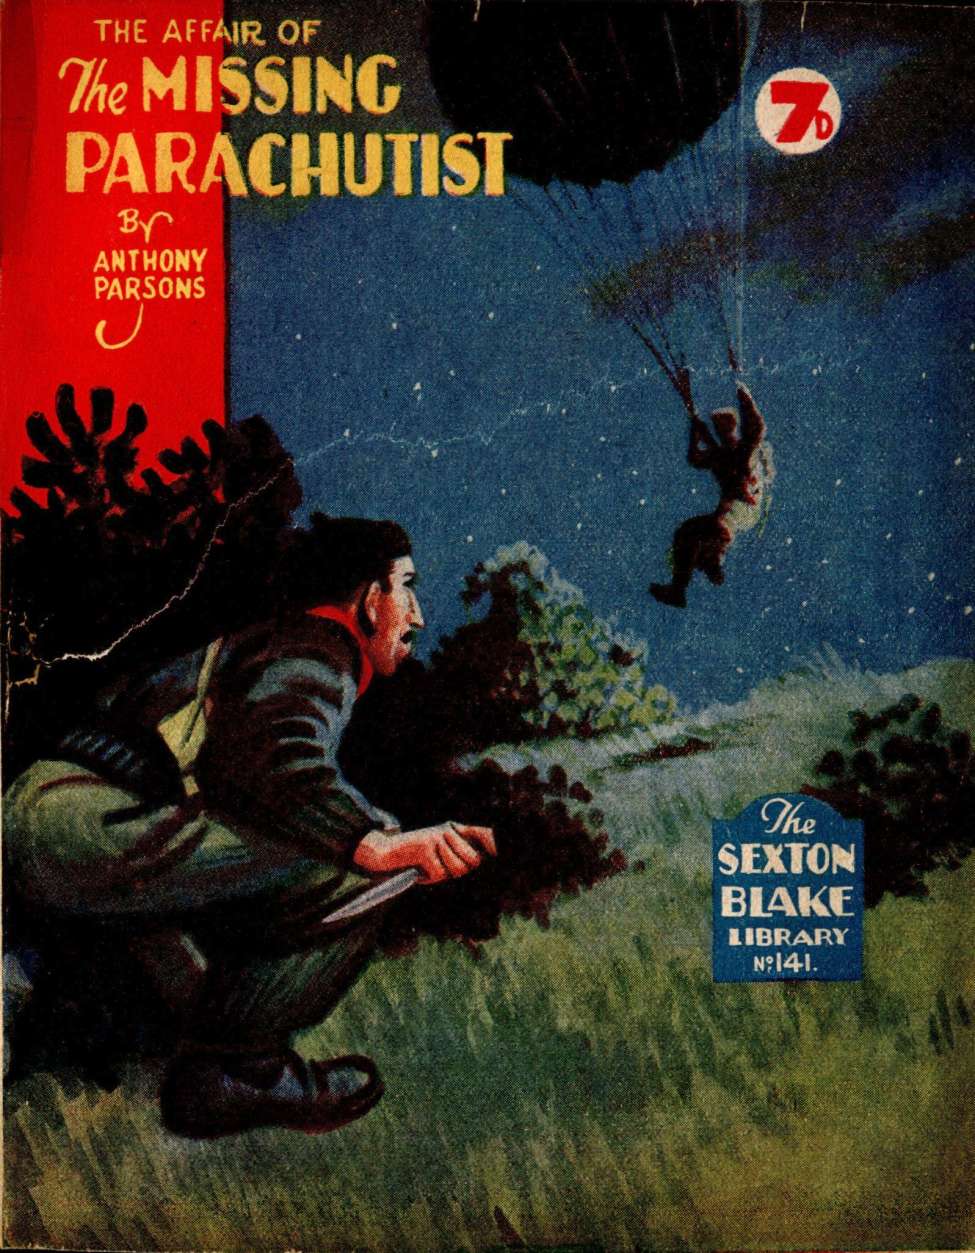 Comic Book Cover For Sexton Blake Library S3 141 - The Affair of the Missing Parachutist